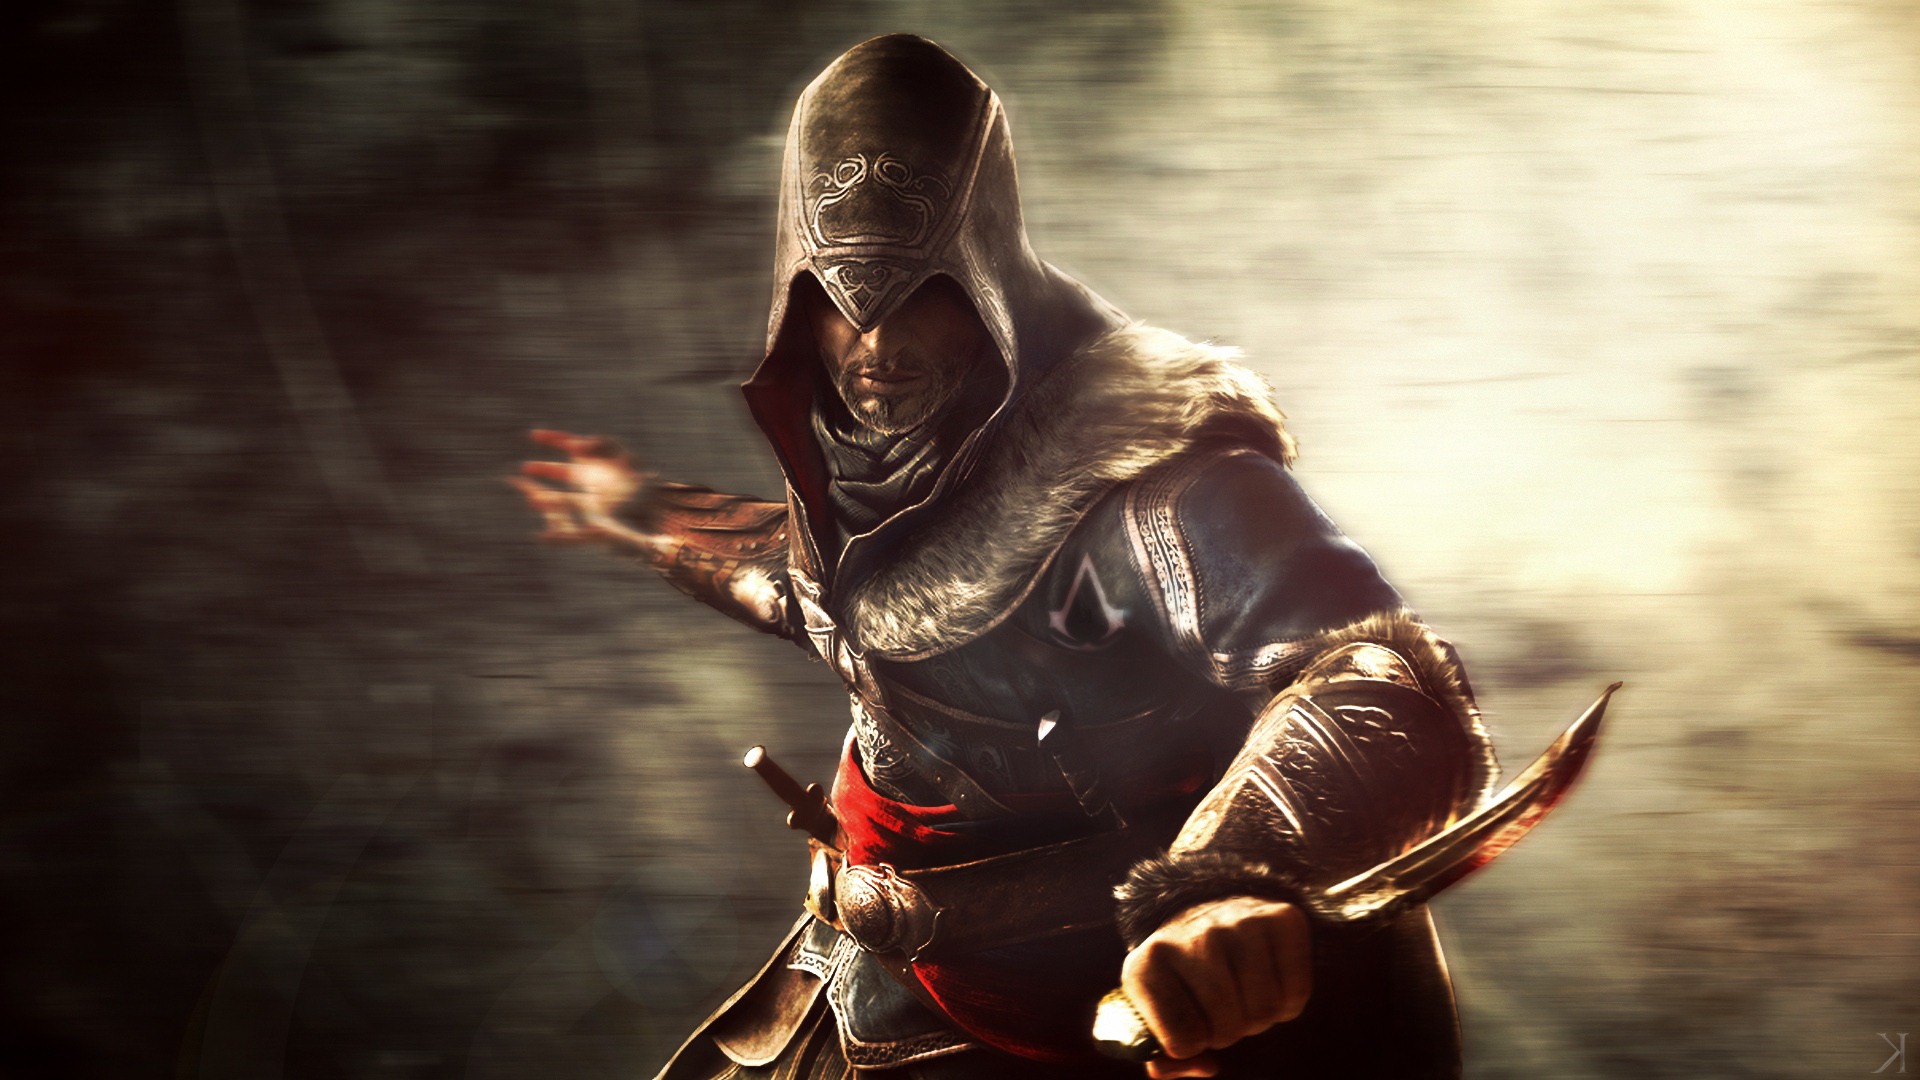 Assassin's Creed: Revelations HD wallpapers #19 - 1920x1080